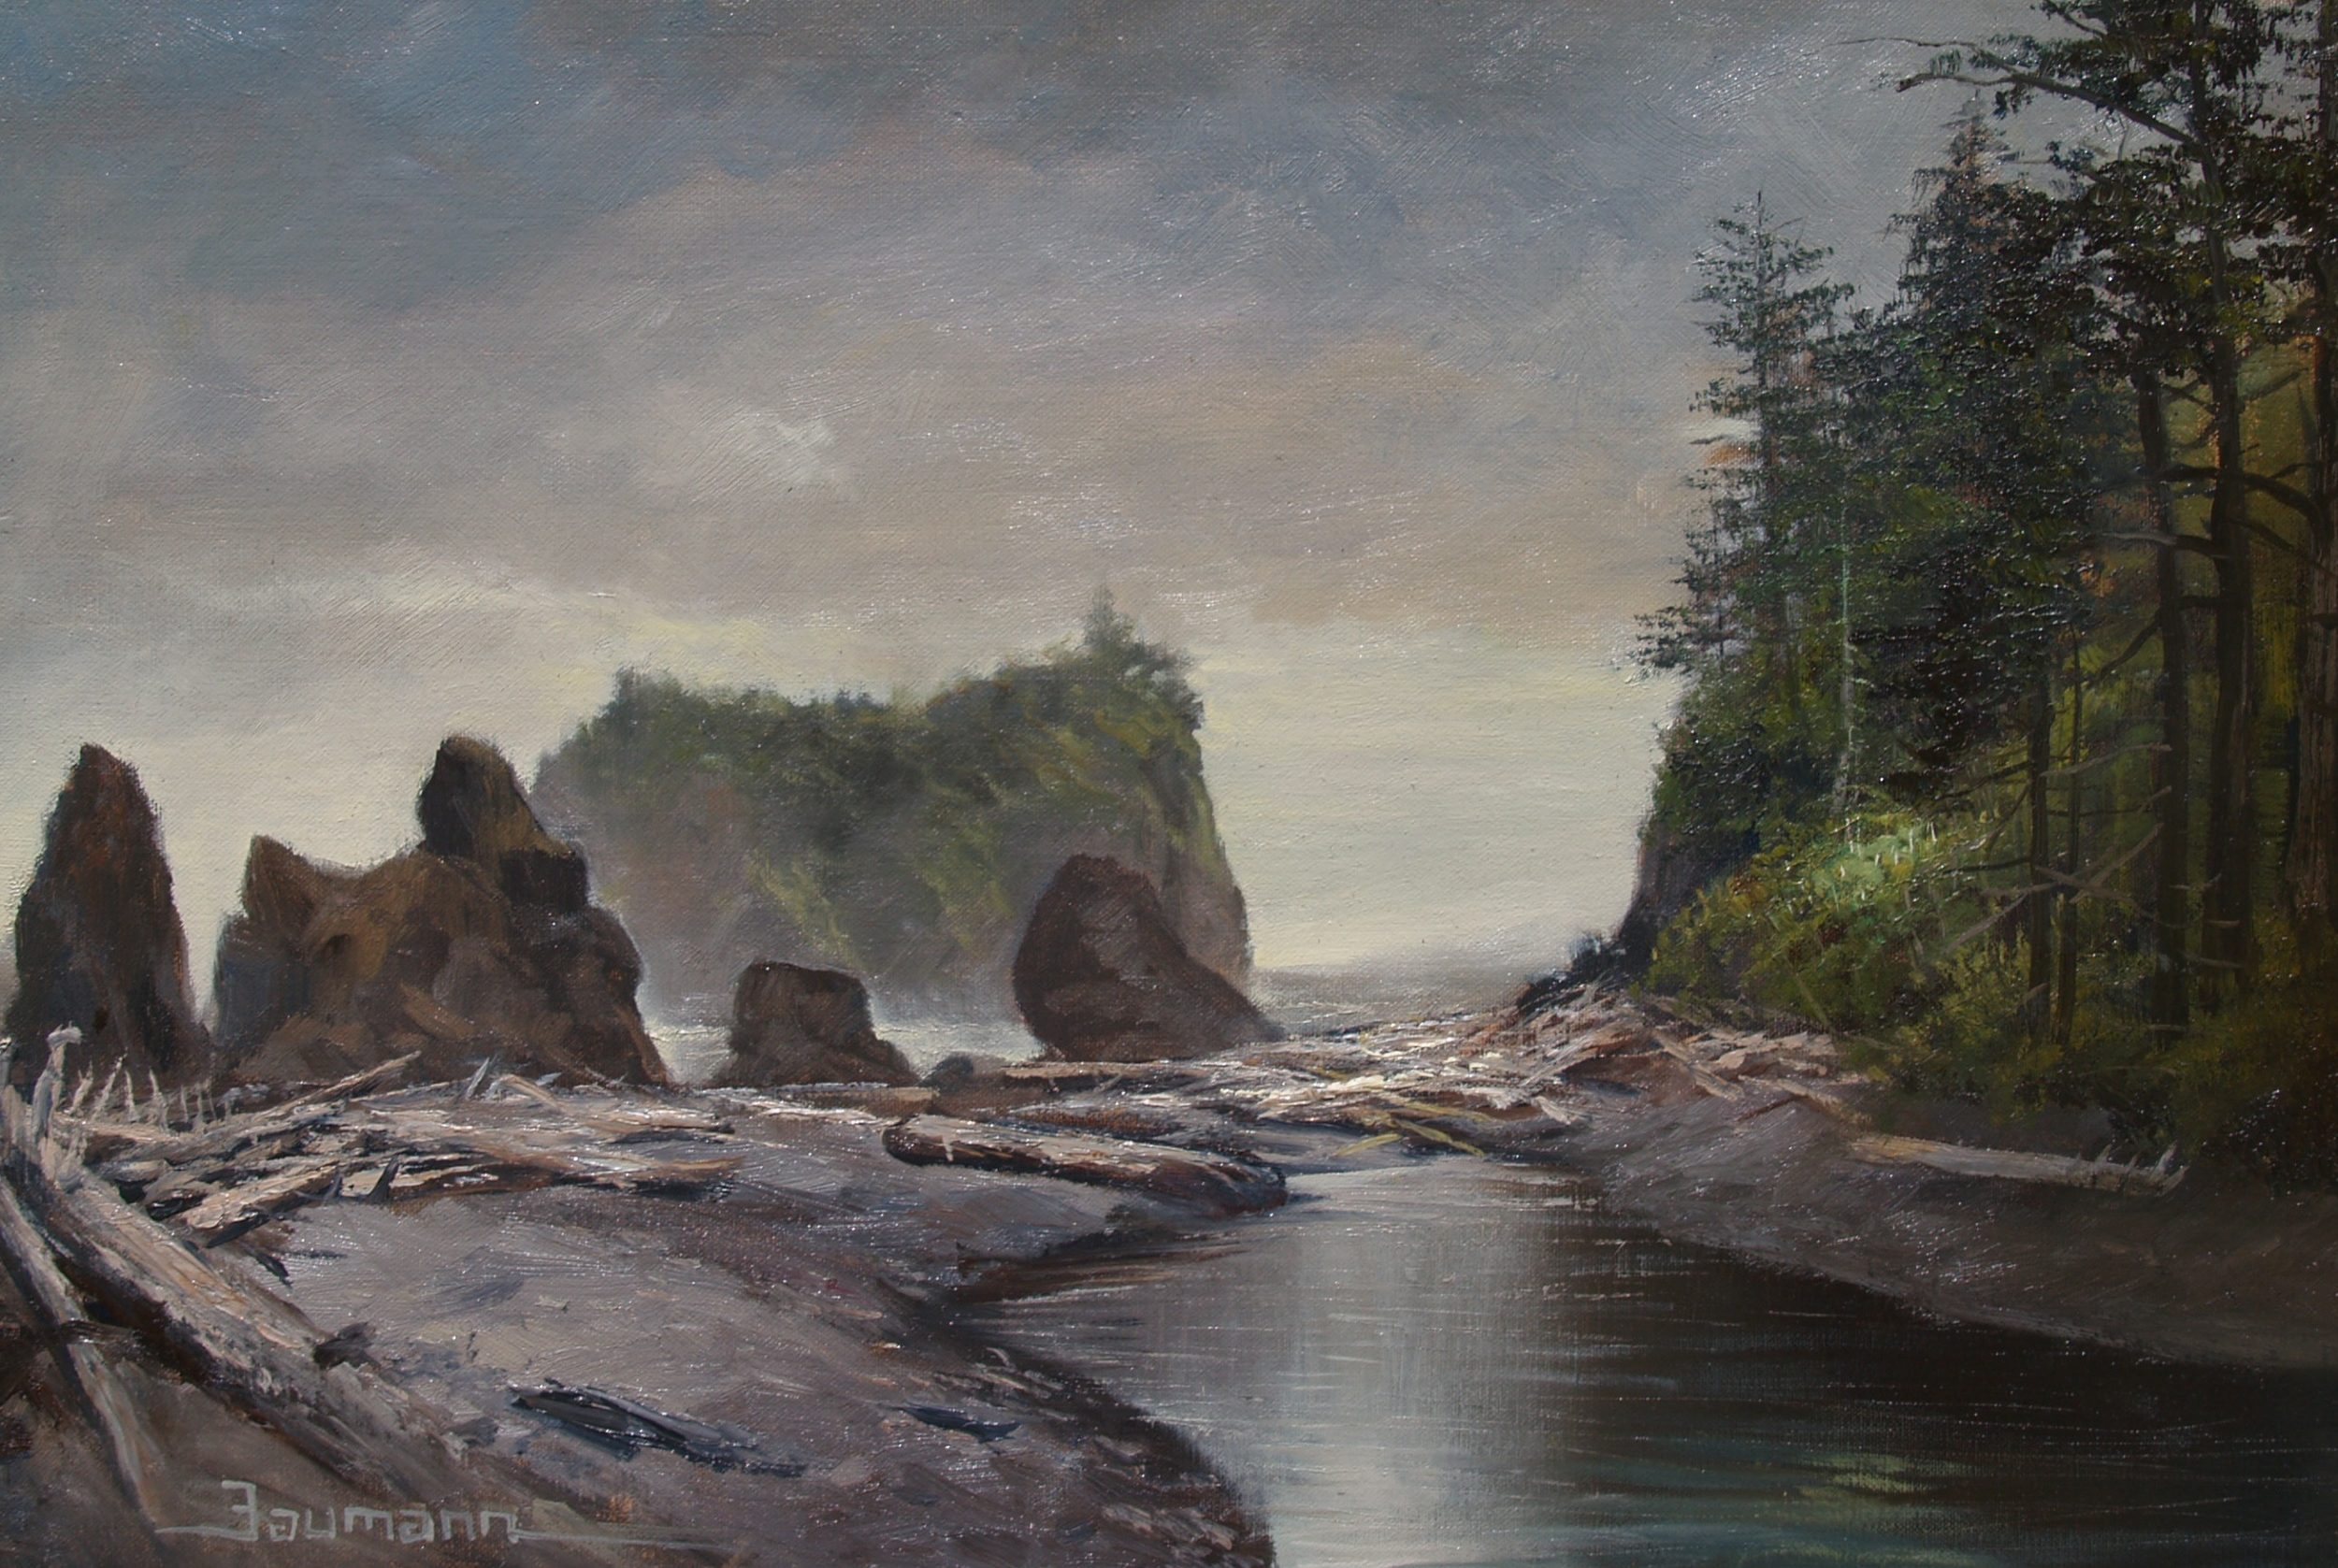 Olympic National Park Painting: Misty Morning